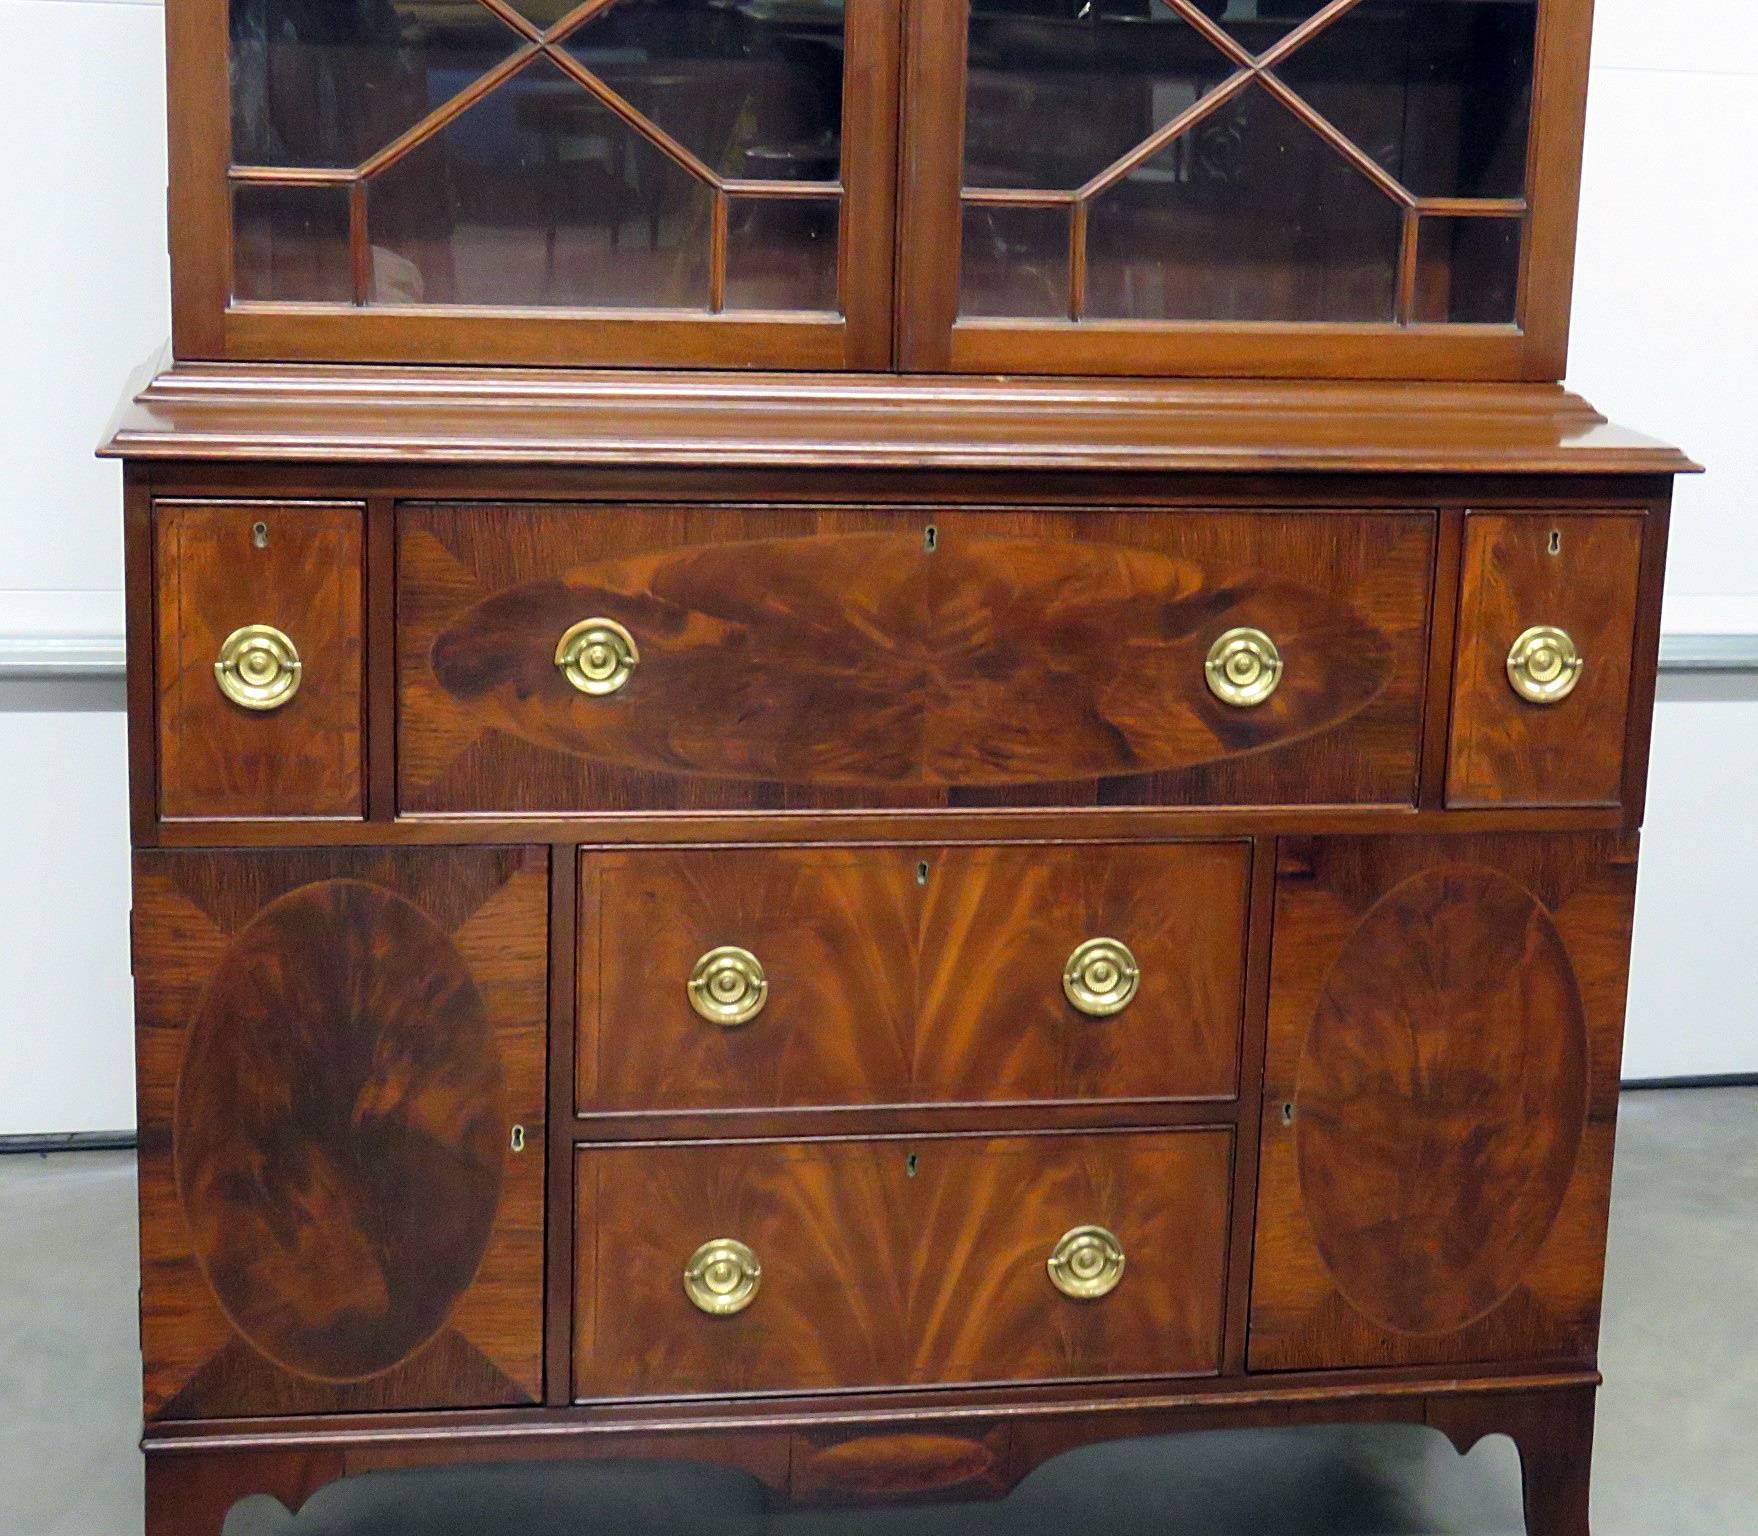 Federal style inlaid china cabinet with two upper doors and two shelves. The bottom section has five drawers and two doors.